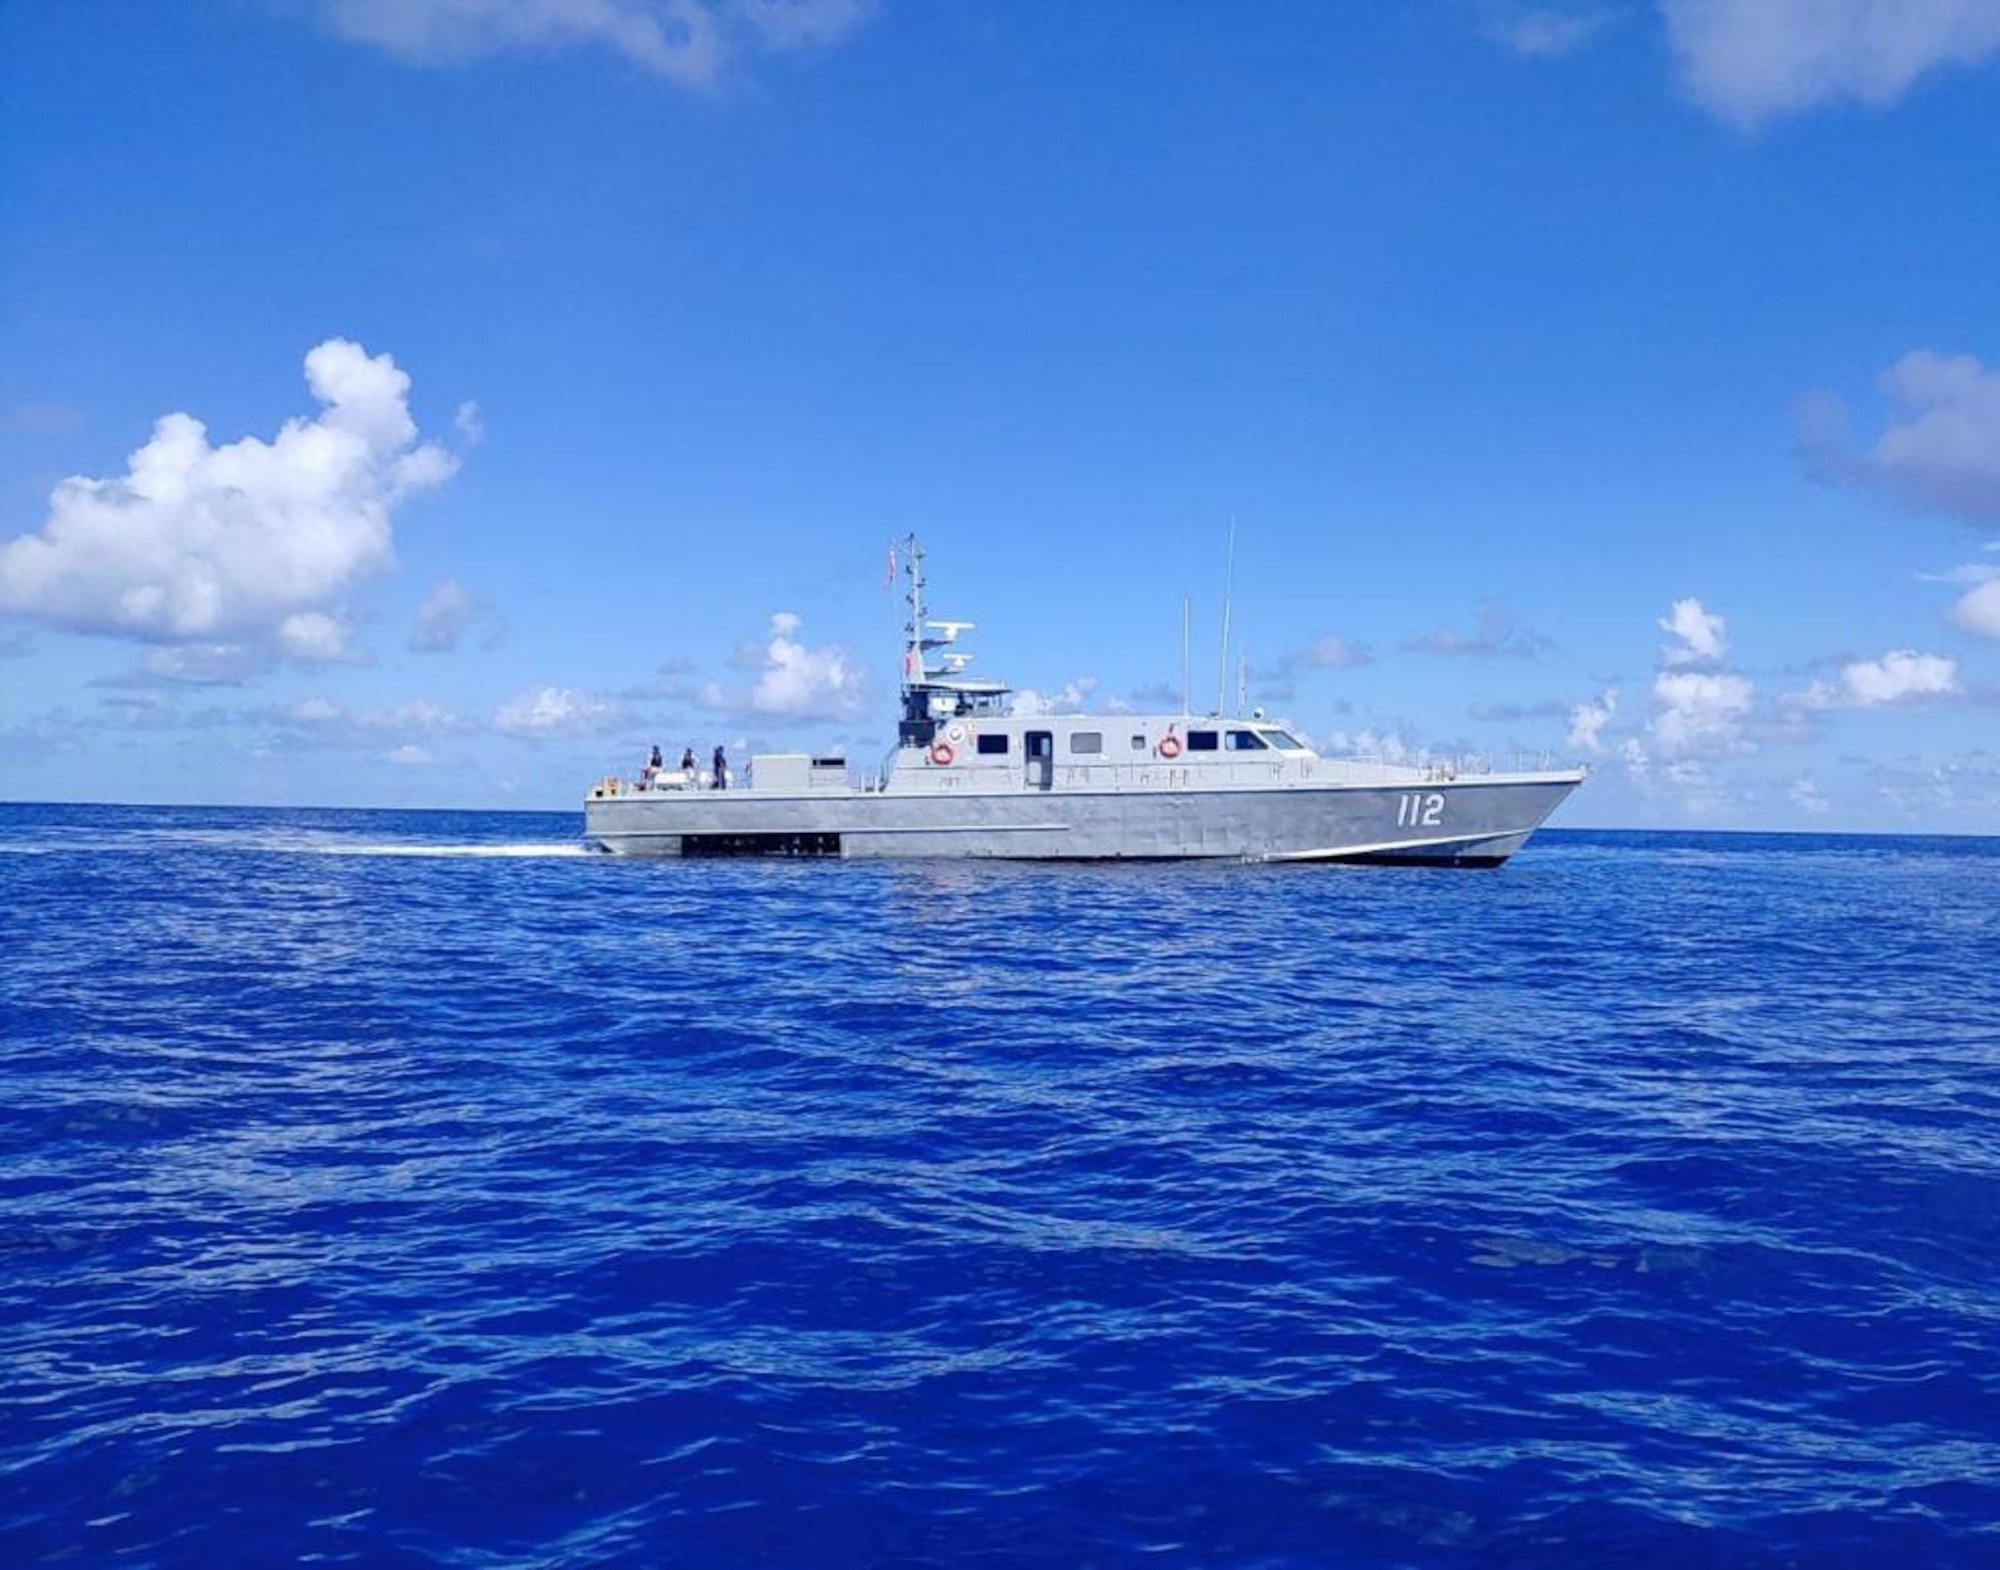 A Dominican Republic Navy ship floats in the Caribbean Sea off the southern coast of the Dominican Republic, Feb. 21, 2023. This ship was taking part in air and maritime integration with U.S. Air Force's 23rd Air Expeditionary Wing during Operation Forward Tiger to improve interoperability and expertise for both forces. (Dominican Republic Navy courtesy photo)